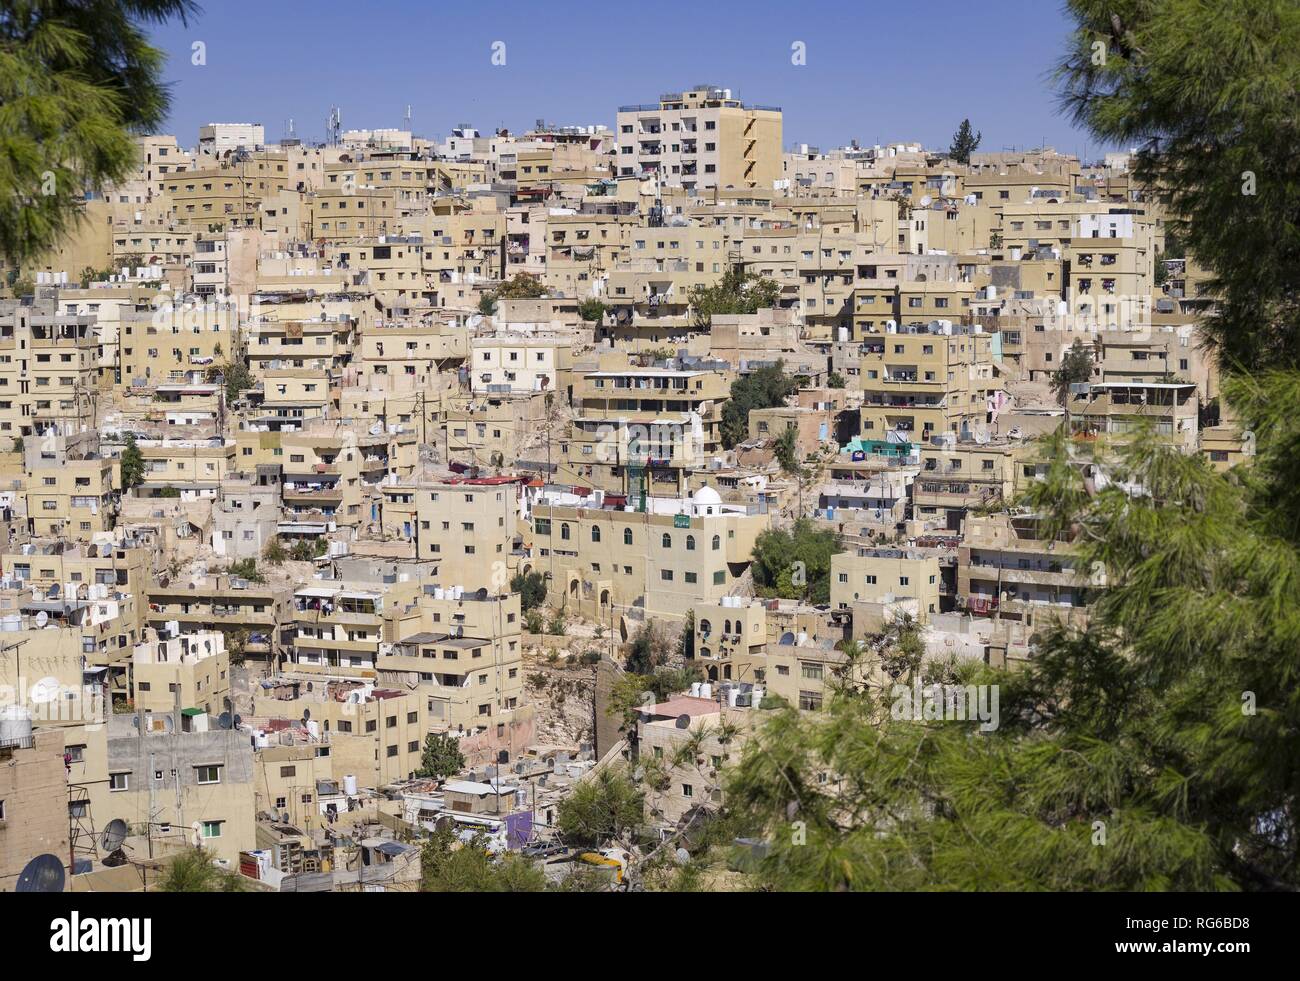 View to the old town of the Jordanian capital Amman. More than 1.8 million people live Amman, many of refugees. November 2018) | usage worldwide Stock Photo - Alamy